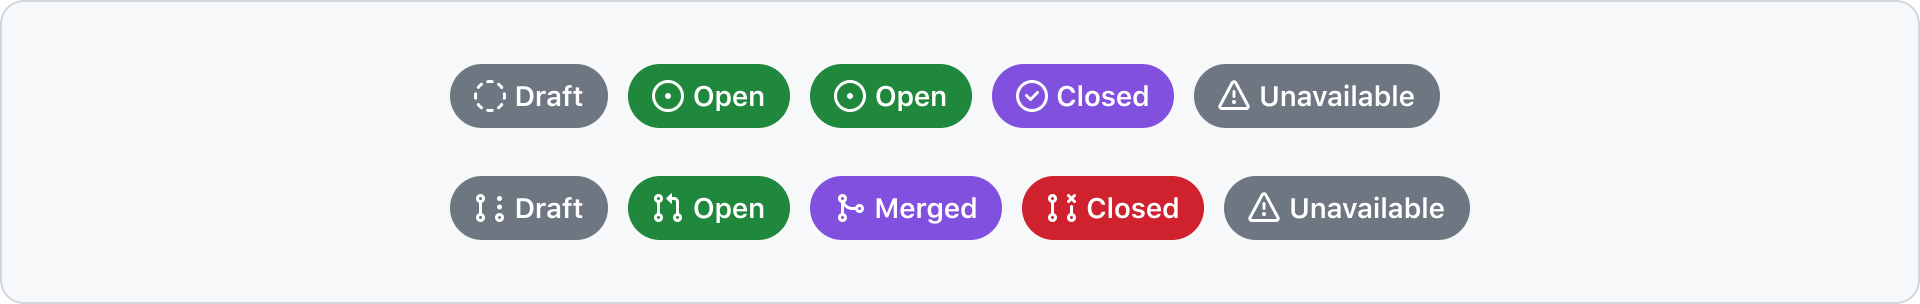 State label displayed for issues and pull requests